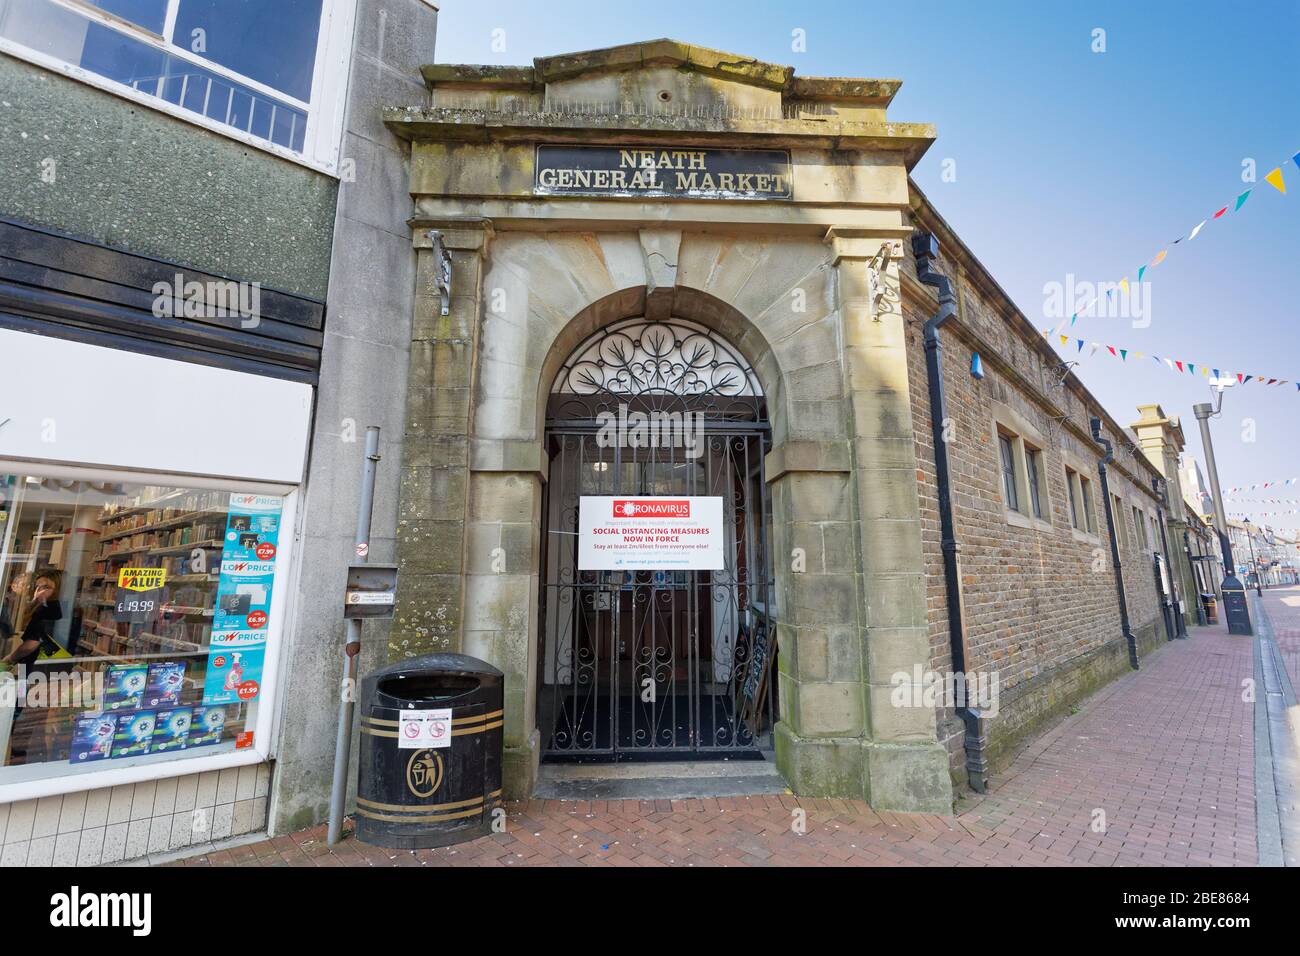 Pictured: The closed down Indoor Market in Green Street, Neath city centre, Wales, UK. Friday 27 March 2020 Re: Covid-19 Coronavirus pandemic, UK. Stock Photo